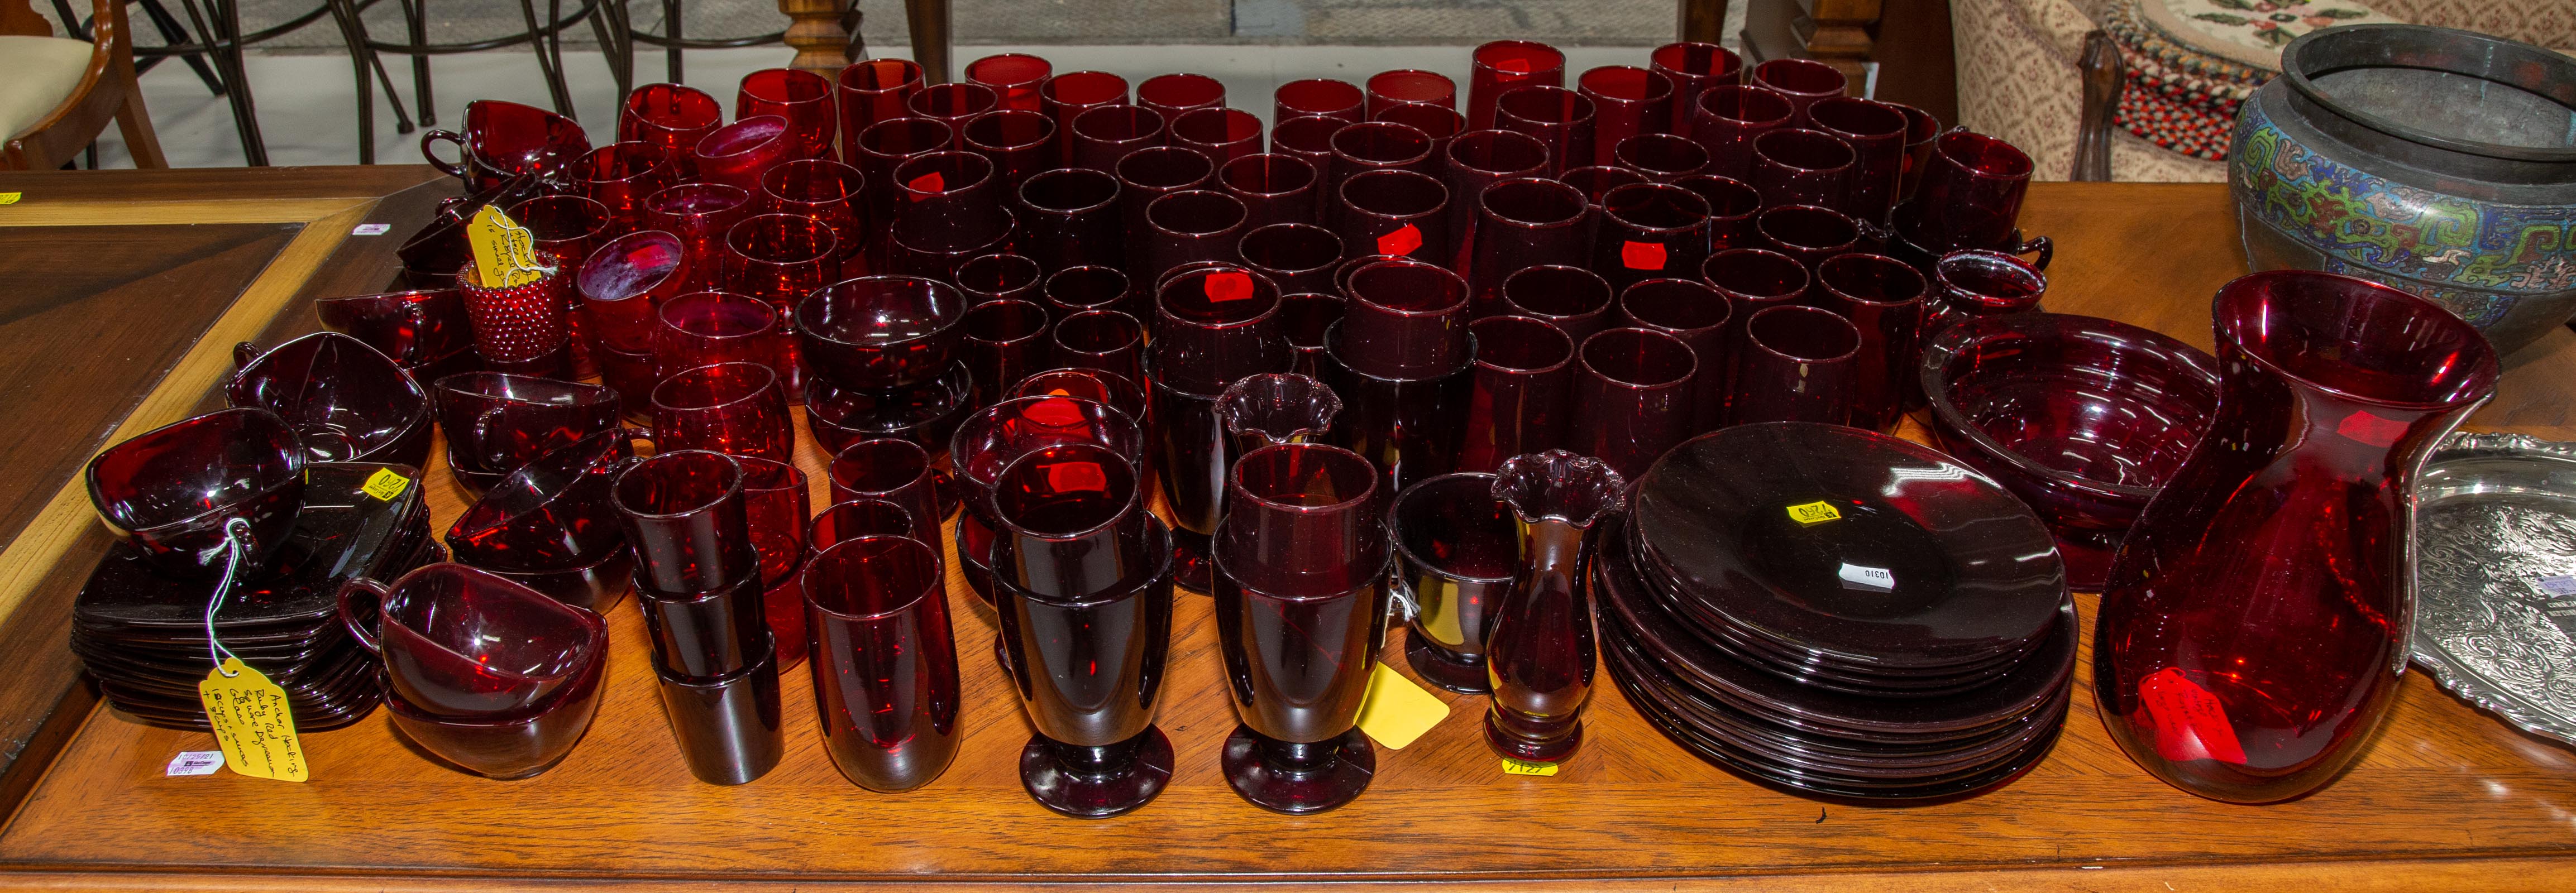 A LARGE COLLECTION OF RED GLASSWARE 2896af